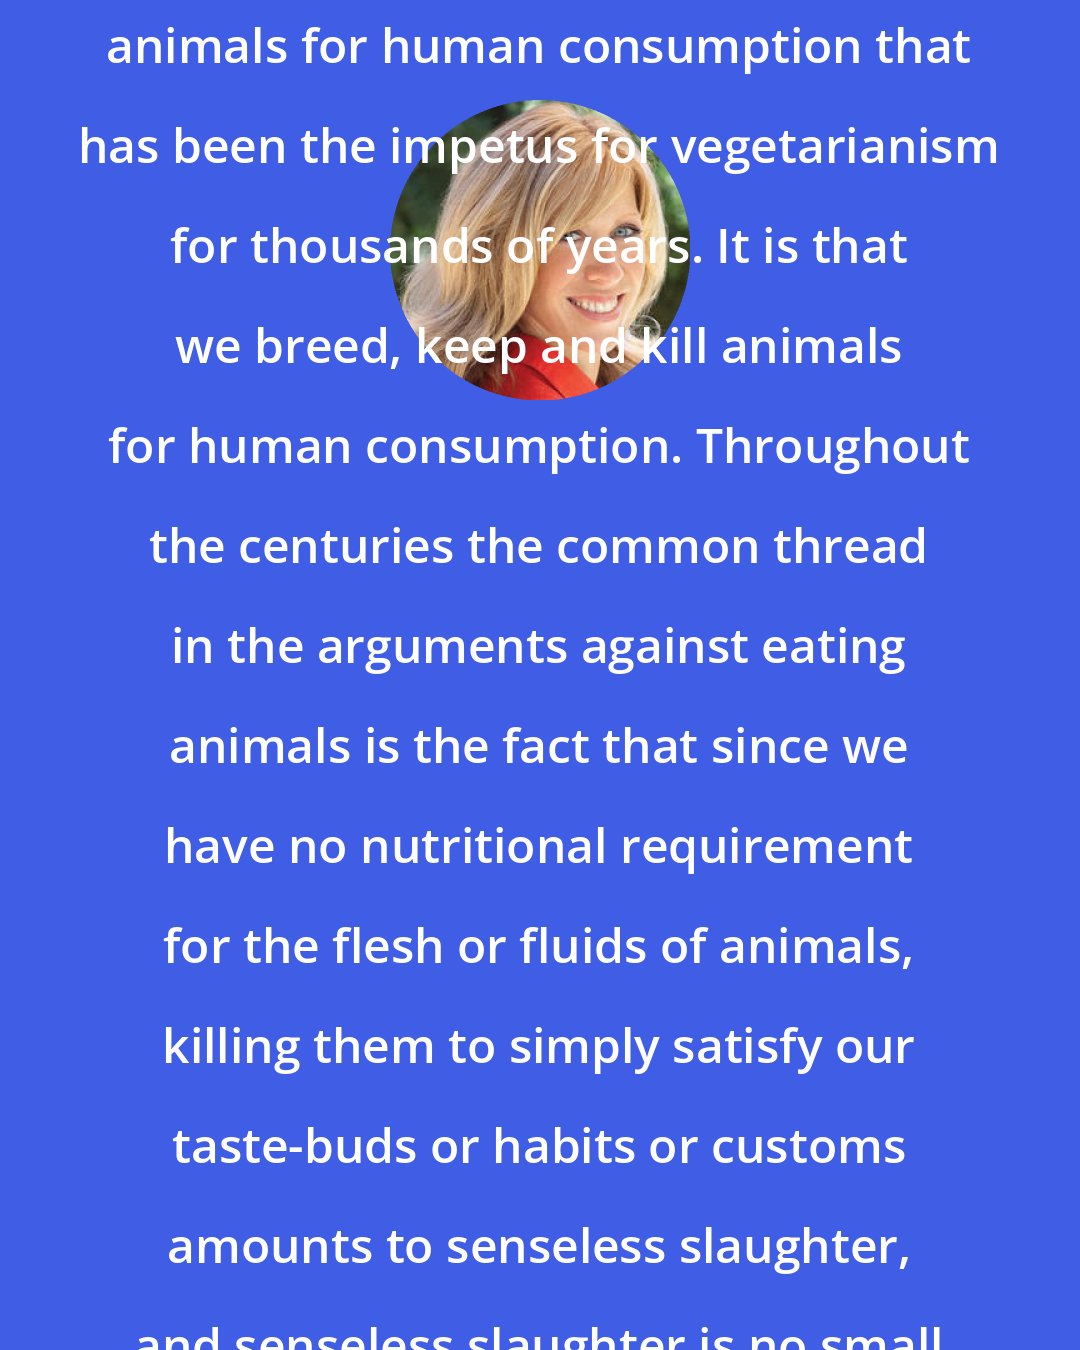 Colleen Patrick-Goudreau: It is not how we breed, keep and kill animals for human consumption that has been the impetus for vegetarianism for thousands of years. It is that we breed, keep and kill animals for human consumption. Throughout the centuries the common thread in the arguments against eating animals is the fact that since we have no nutritional requirement for the flesh or fluids of animals, killing them to simply satisfy our taste-buds or habits or customs amounts to senseless slaughter, and senseless slaughter is no small thing.